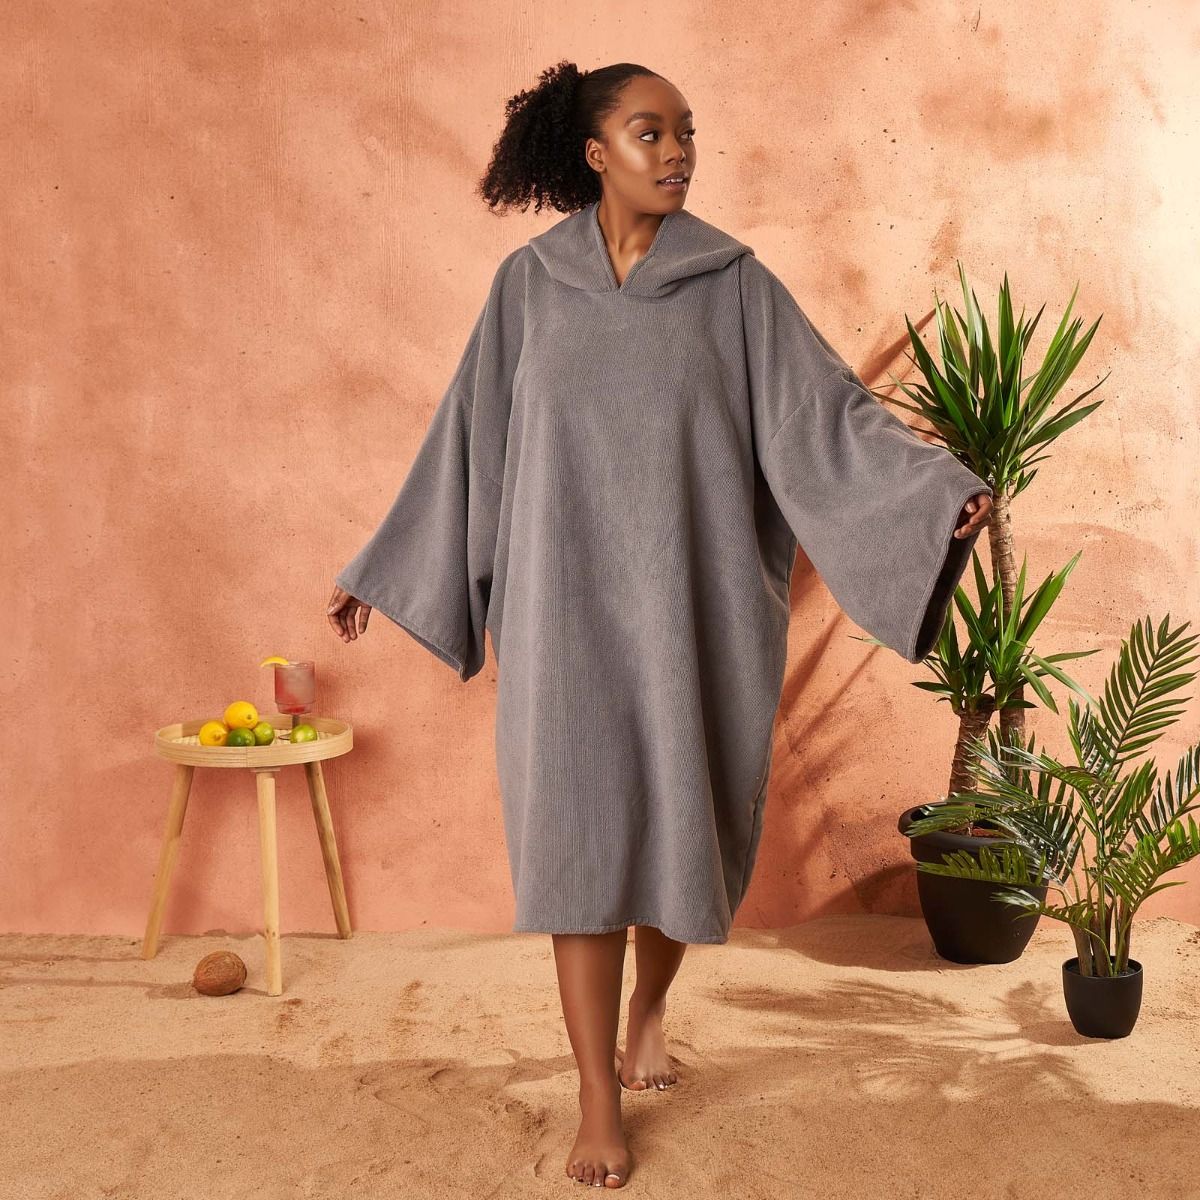 Brentfords Adult Poncho Oversized Changing Robe - Charcoal